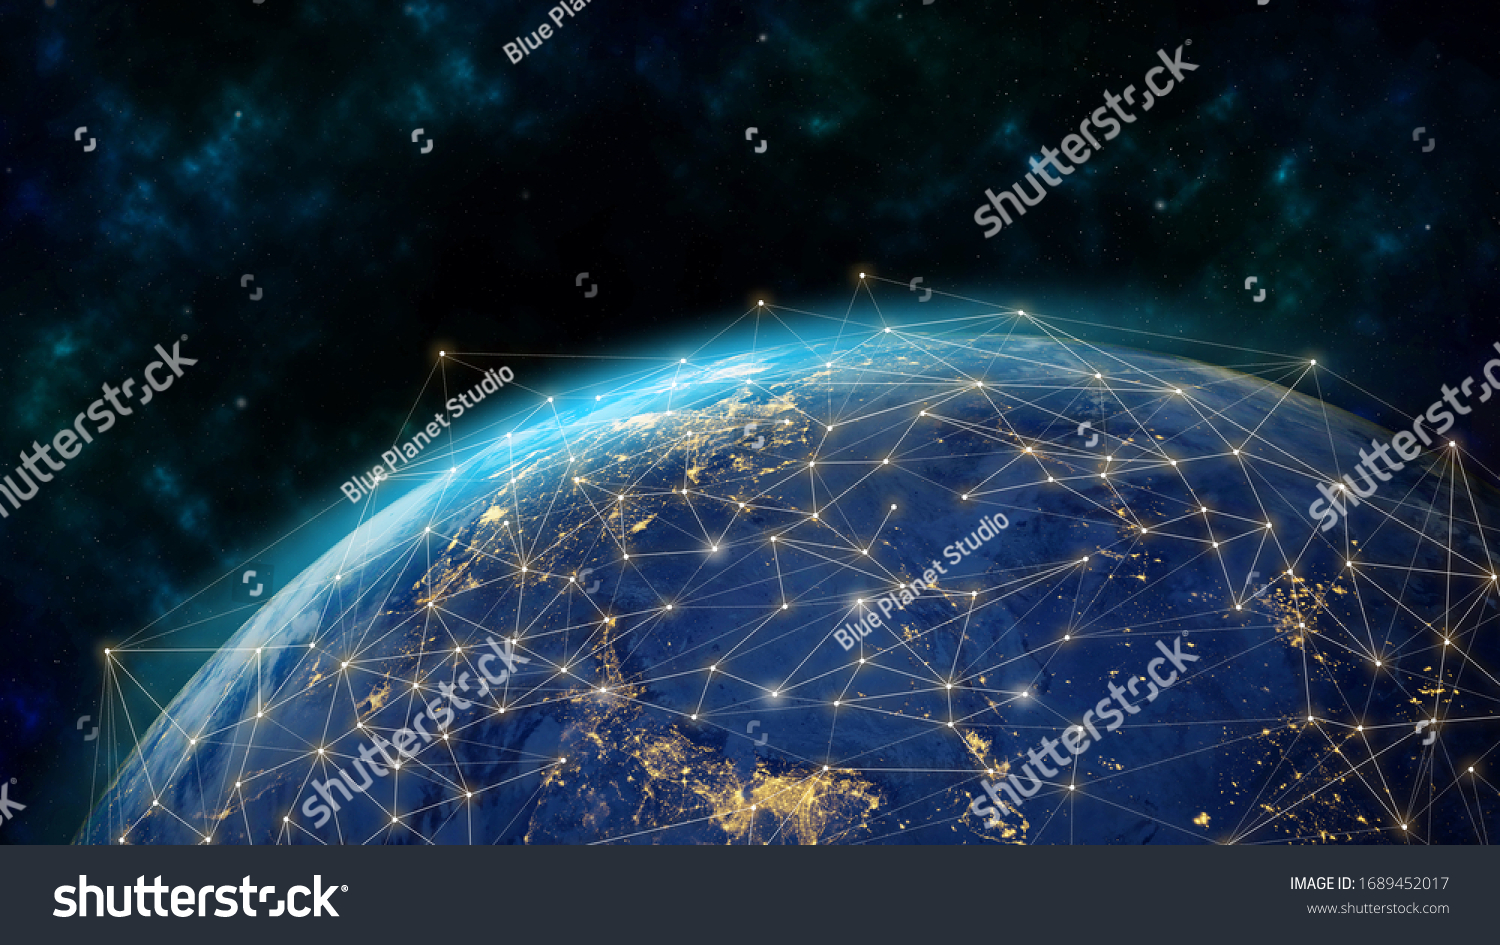 Global network modern creative telecommunication and internet connection. Concept of 5G wireless digital connection and internet of things future. #1689452017